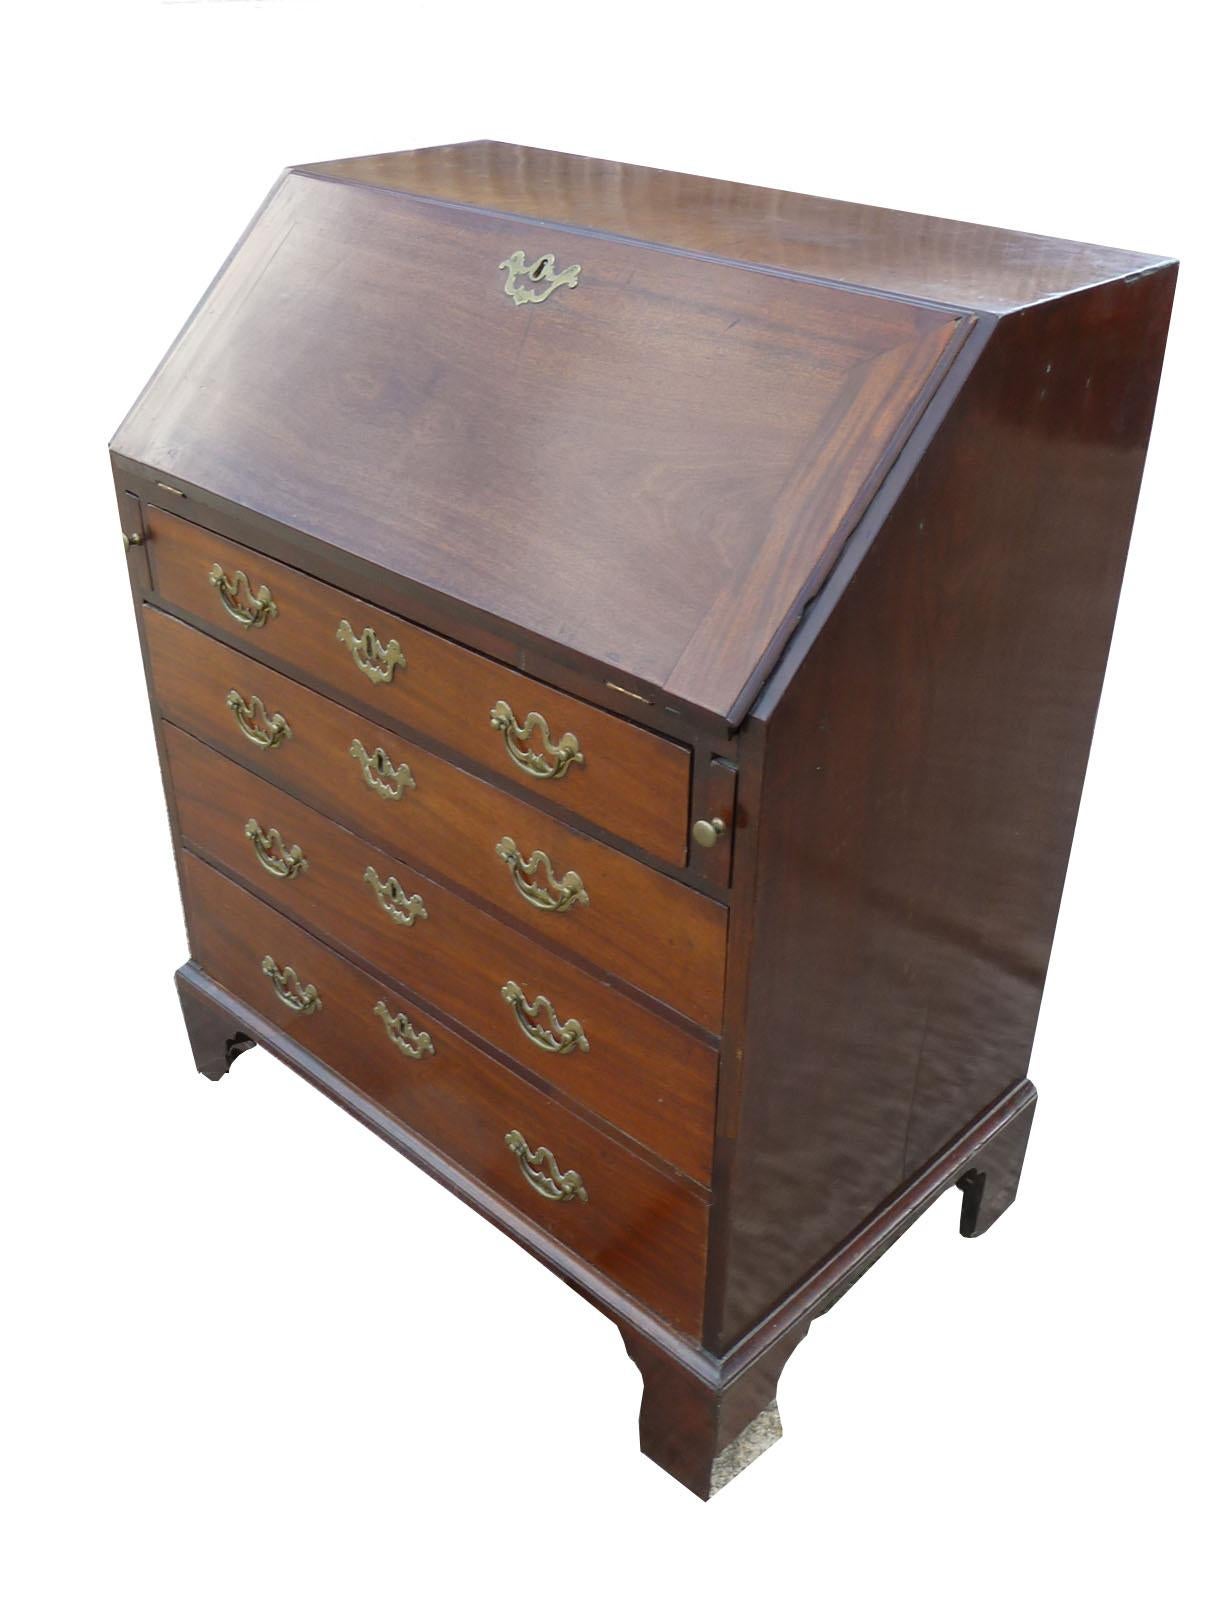 For sale is a good quality, unusual, small George III red walnut bureau. The bureau has a fall front opening to reveal a fitted interior including several drawers as well as pigeon holes. Below this the bureau has four drawers, each with original